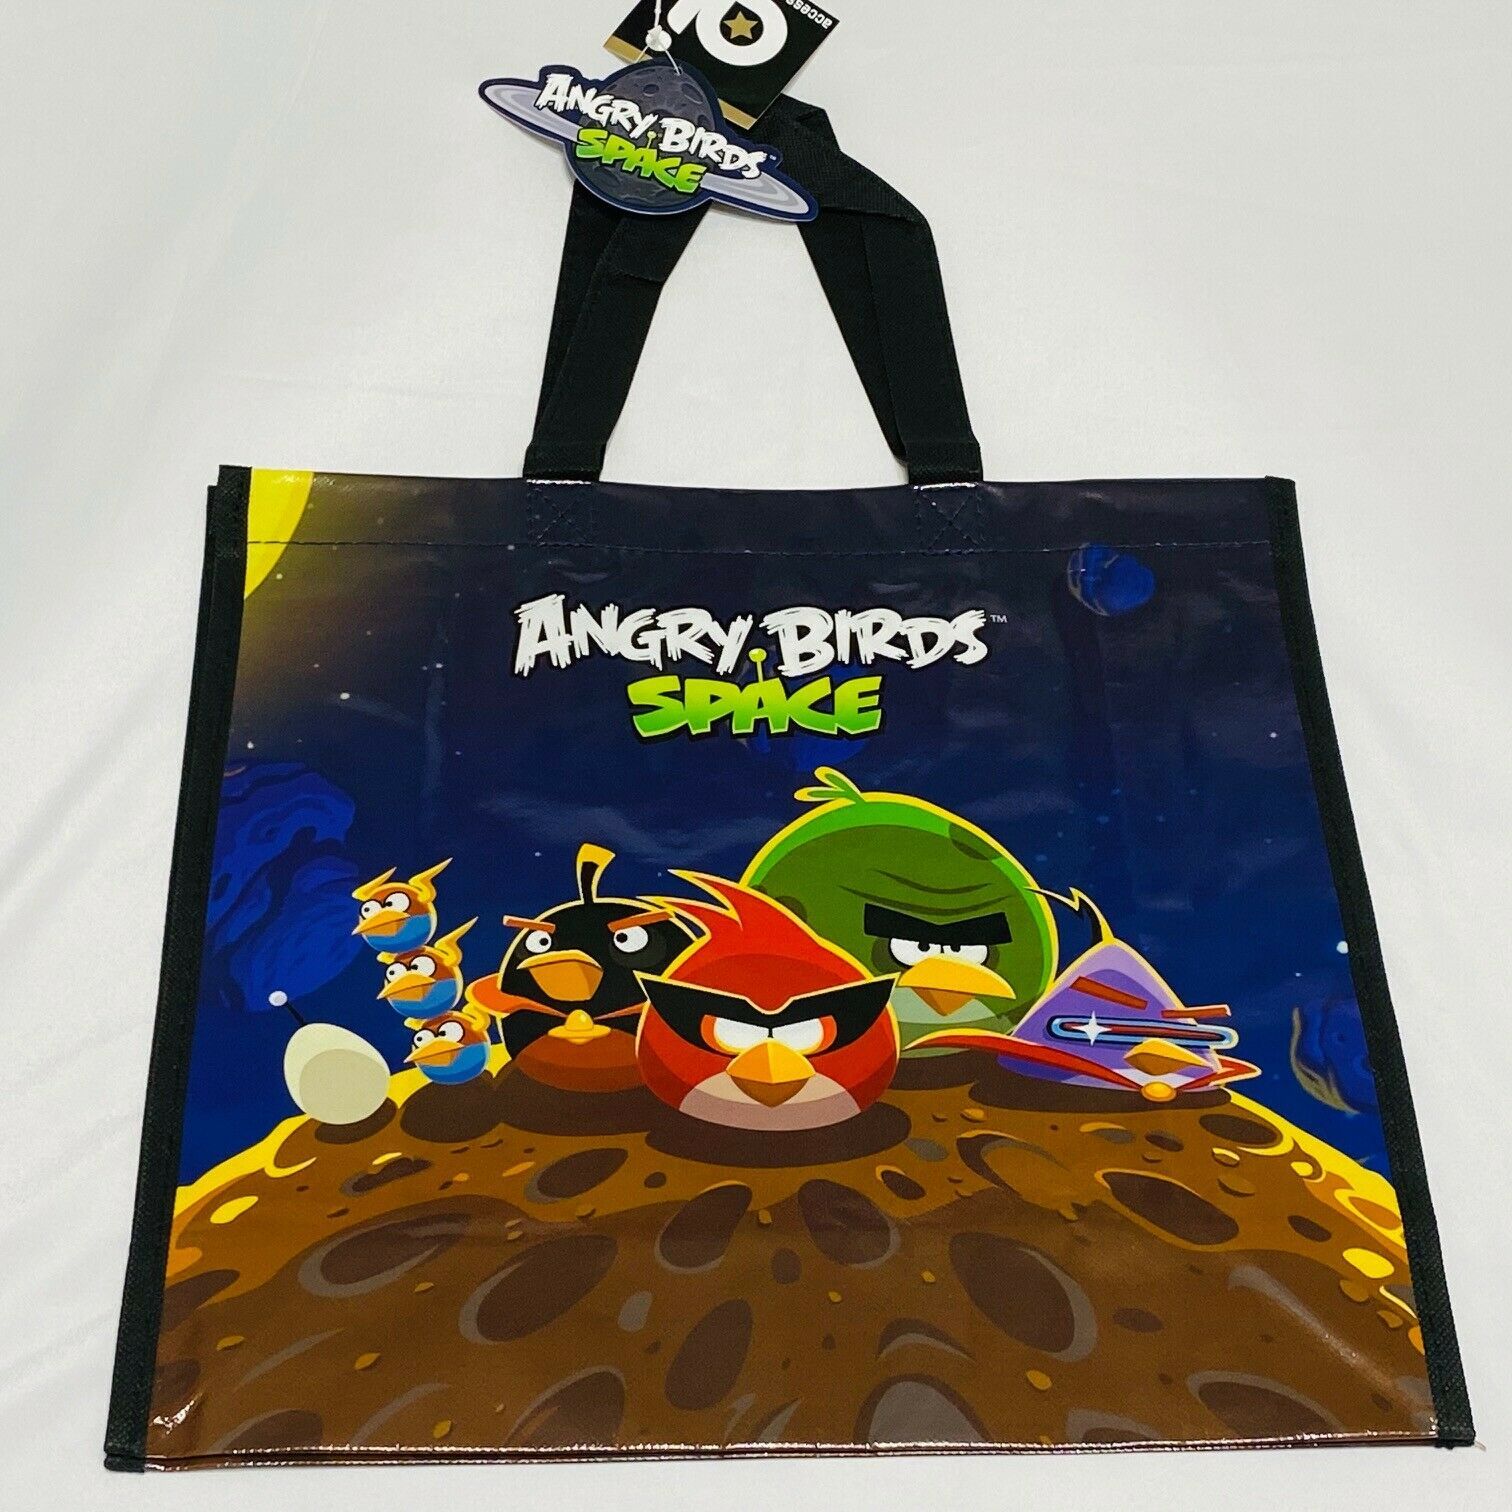 Angry Birds Space Non Woven Tote Bag 13.5 x 14 x 5.5 inches